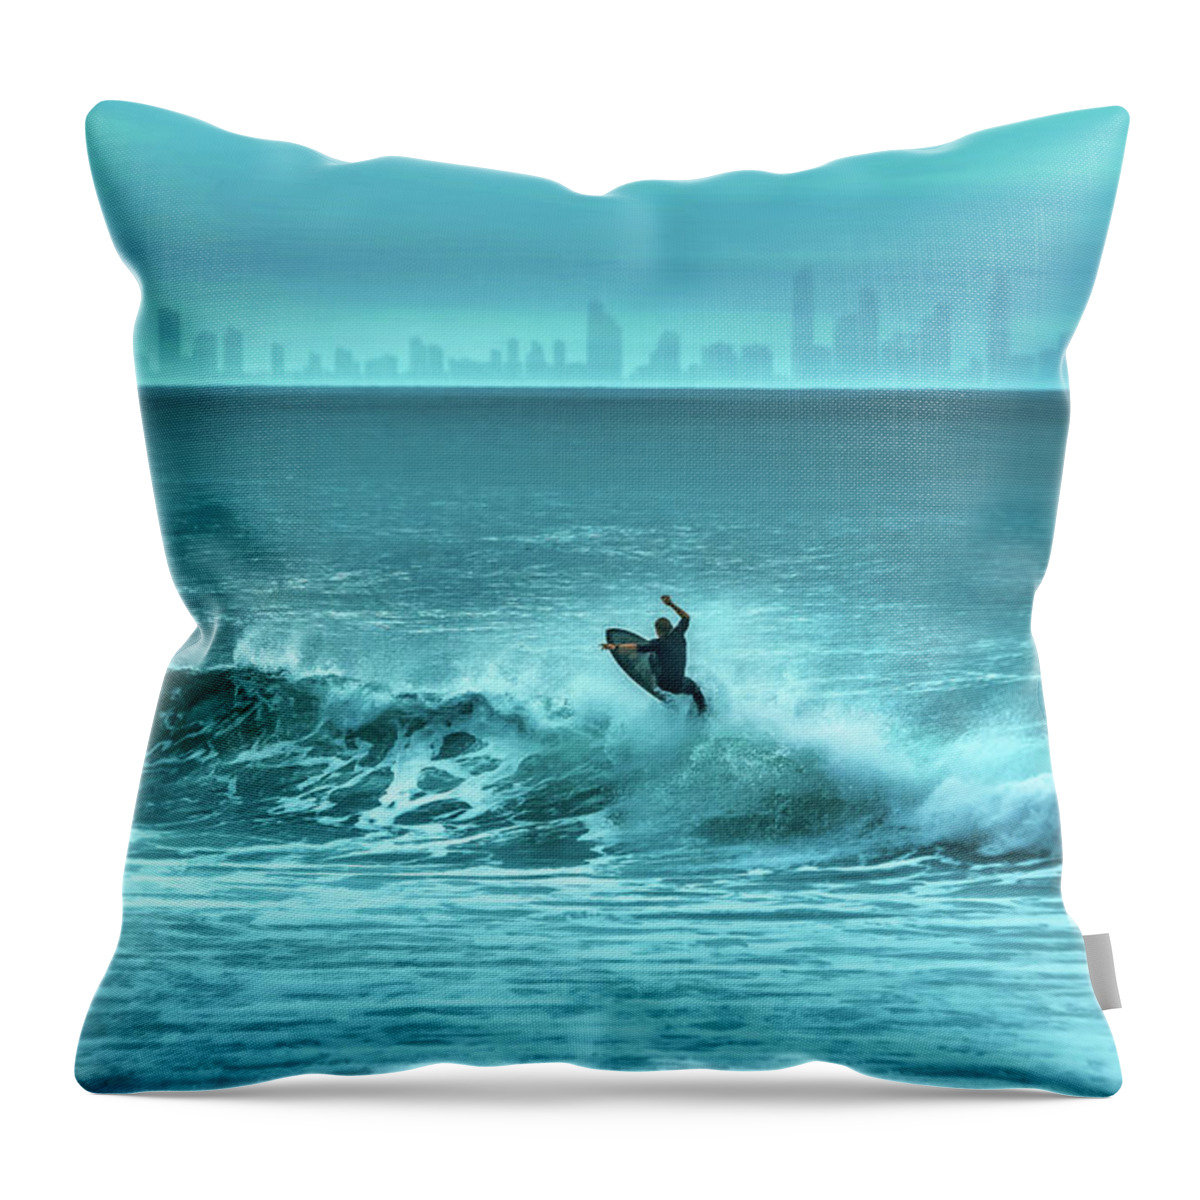 Epic Surfing Moment Throw Pillow featuring the photograph Euphoria by Az Jackson